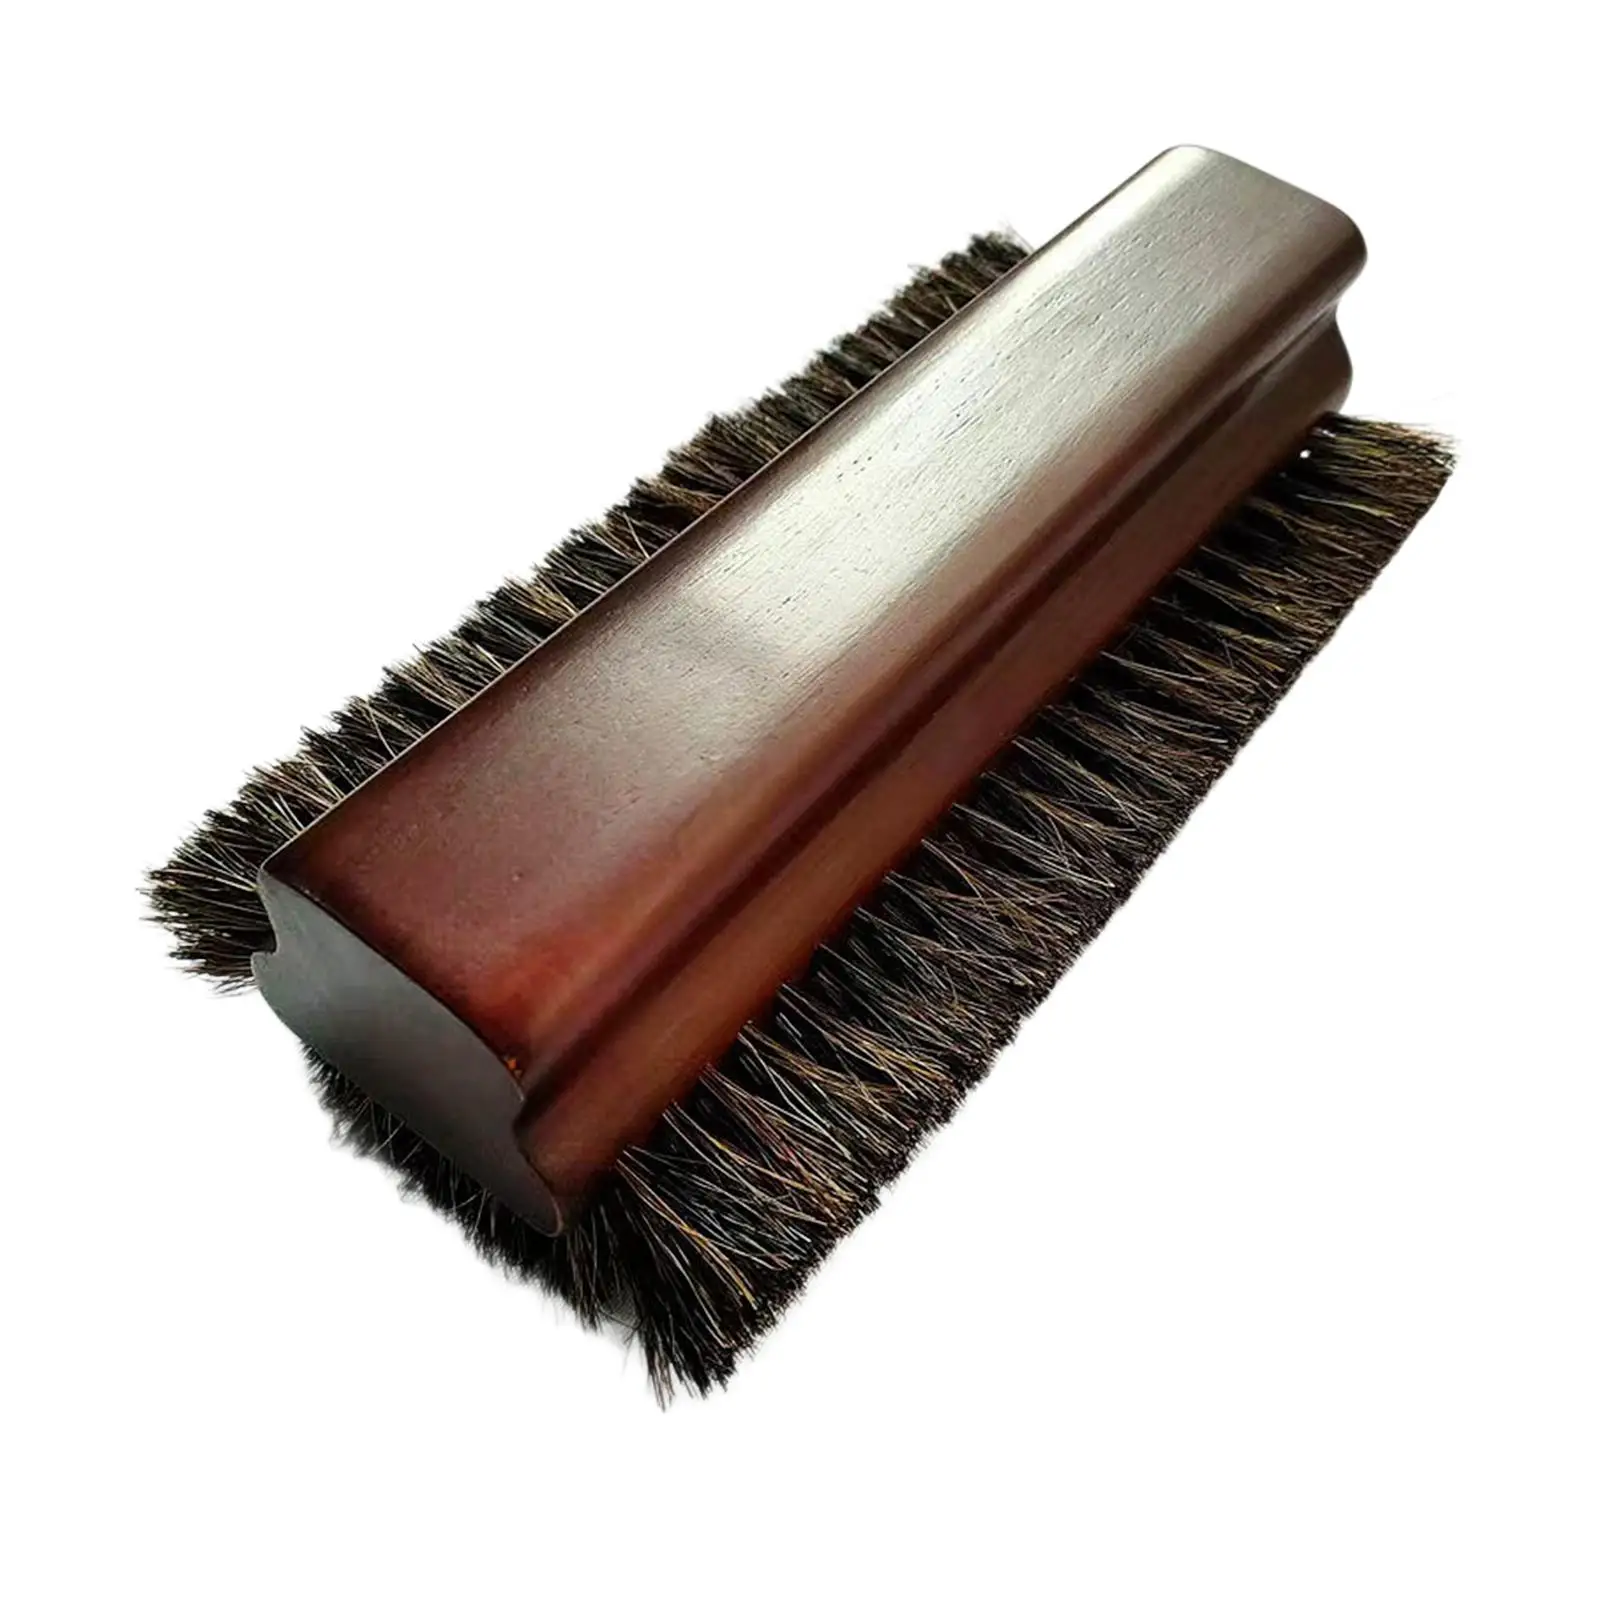 Billiard Table Brush Wooden Handle Durable Comfortable Gripping Lightweight Practical Convenient Three Sided Horse Hair Brushes